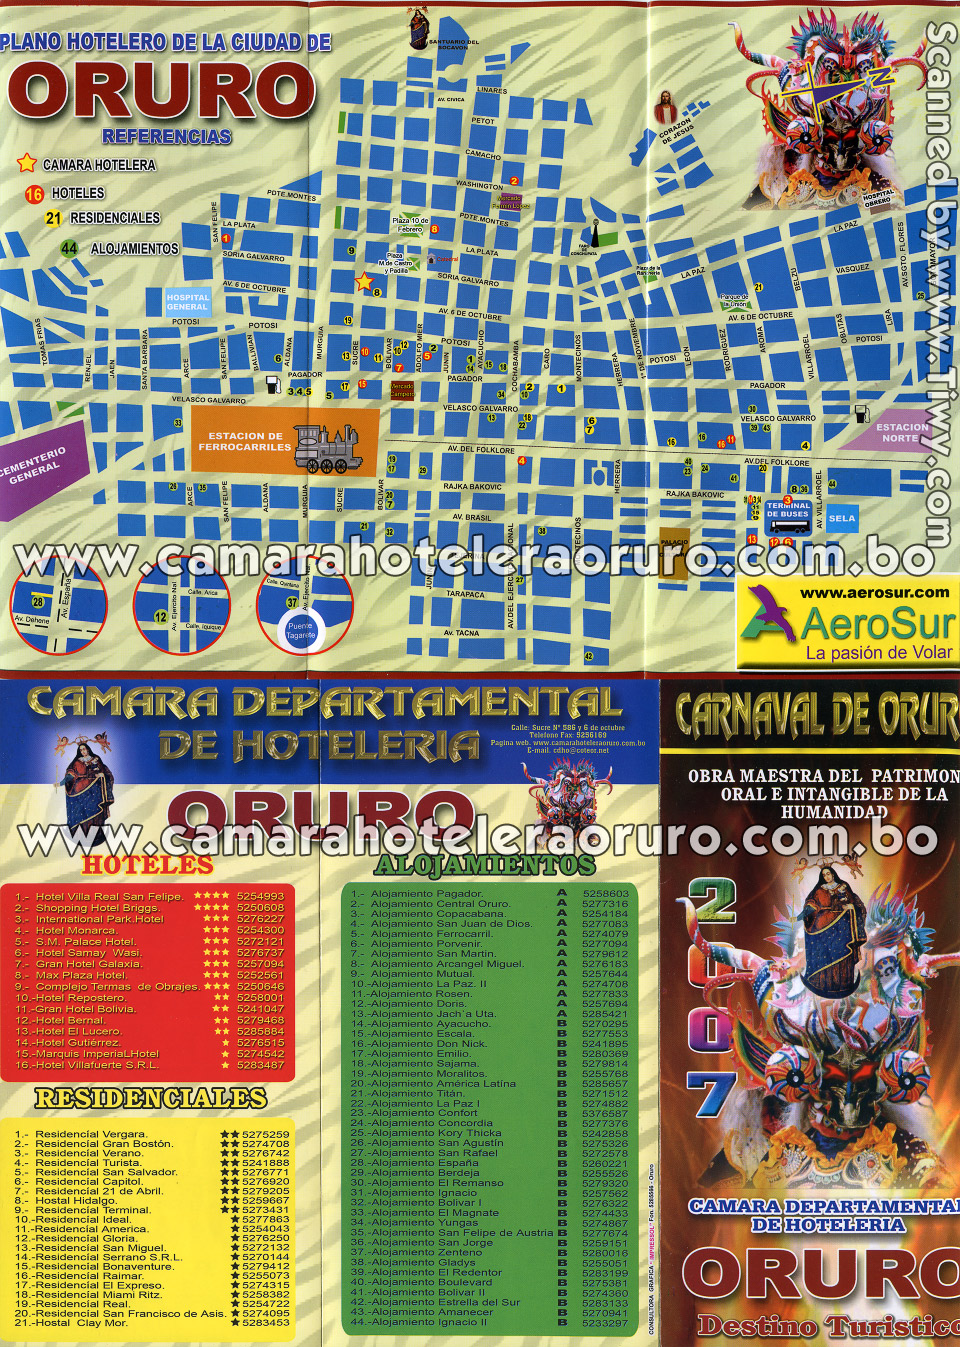 Map of hotels location in Oruro